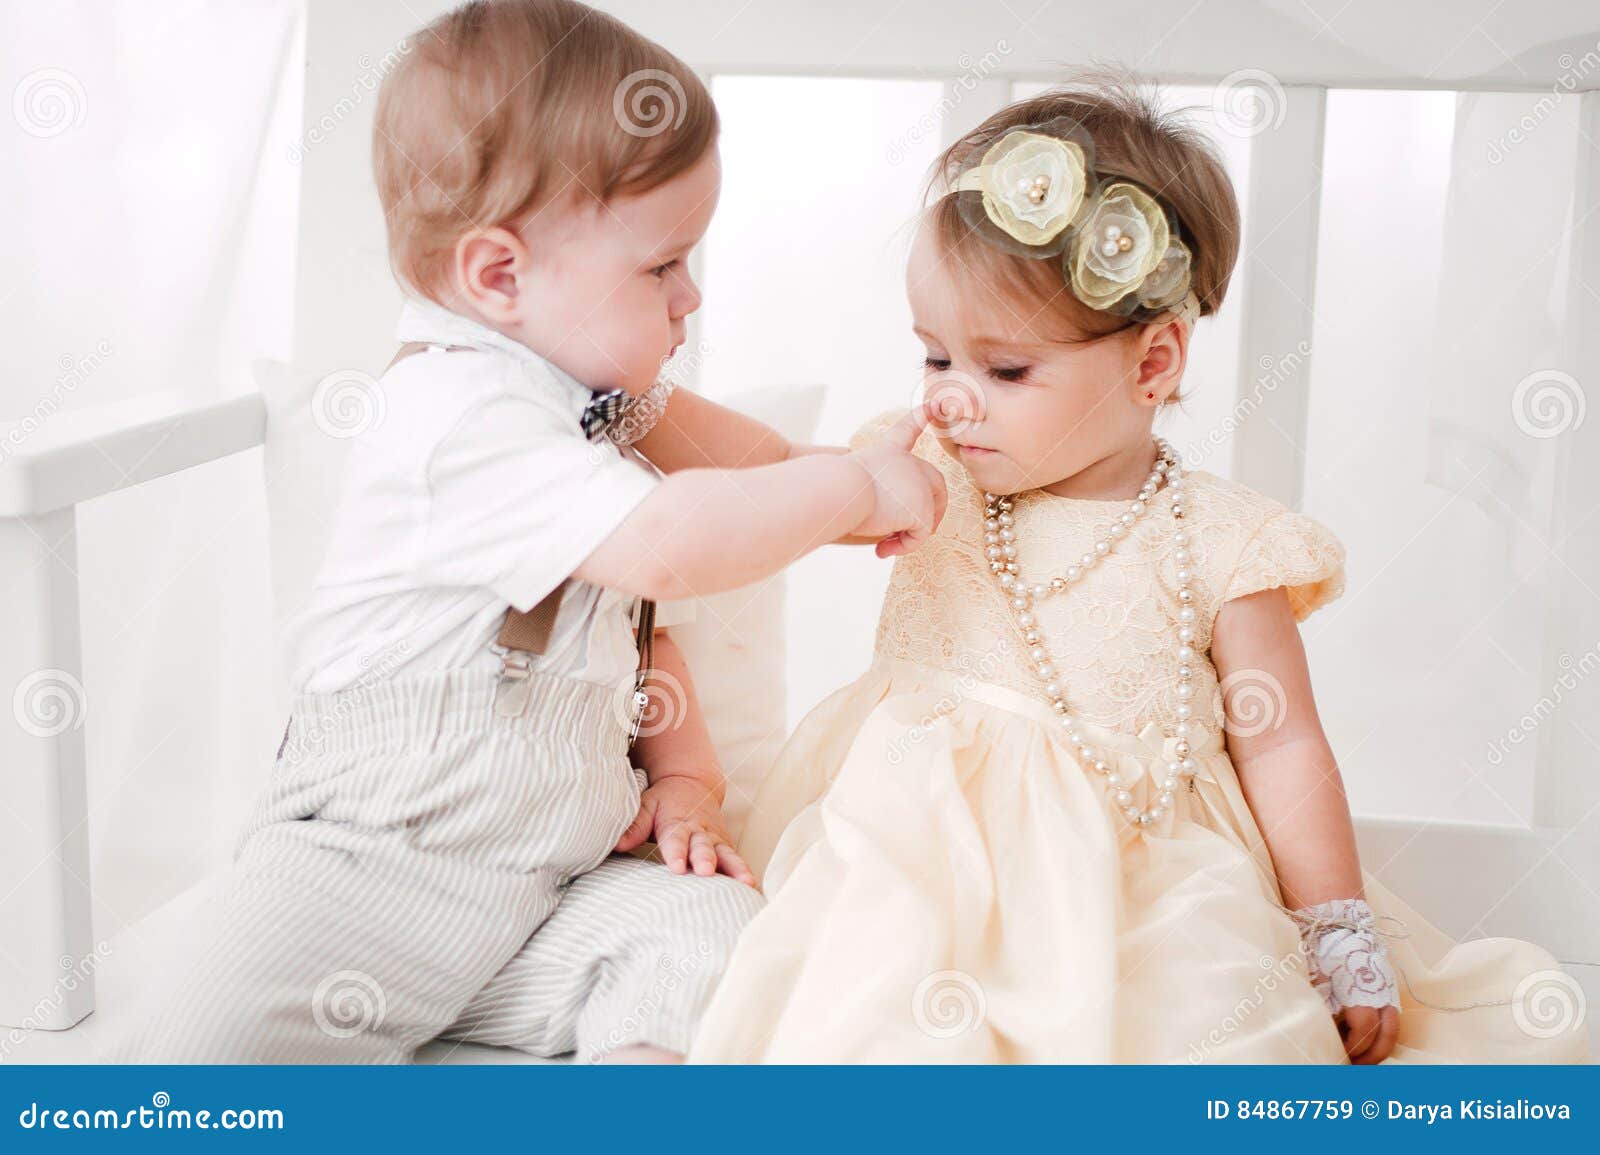 Two Babies Wedding Boy And Girl Dressed As Bride And Groom Stock